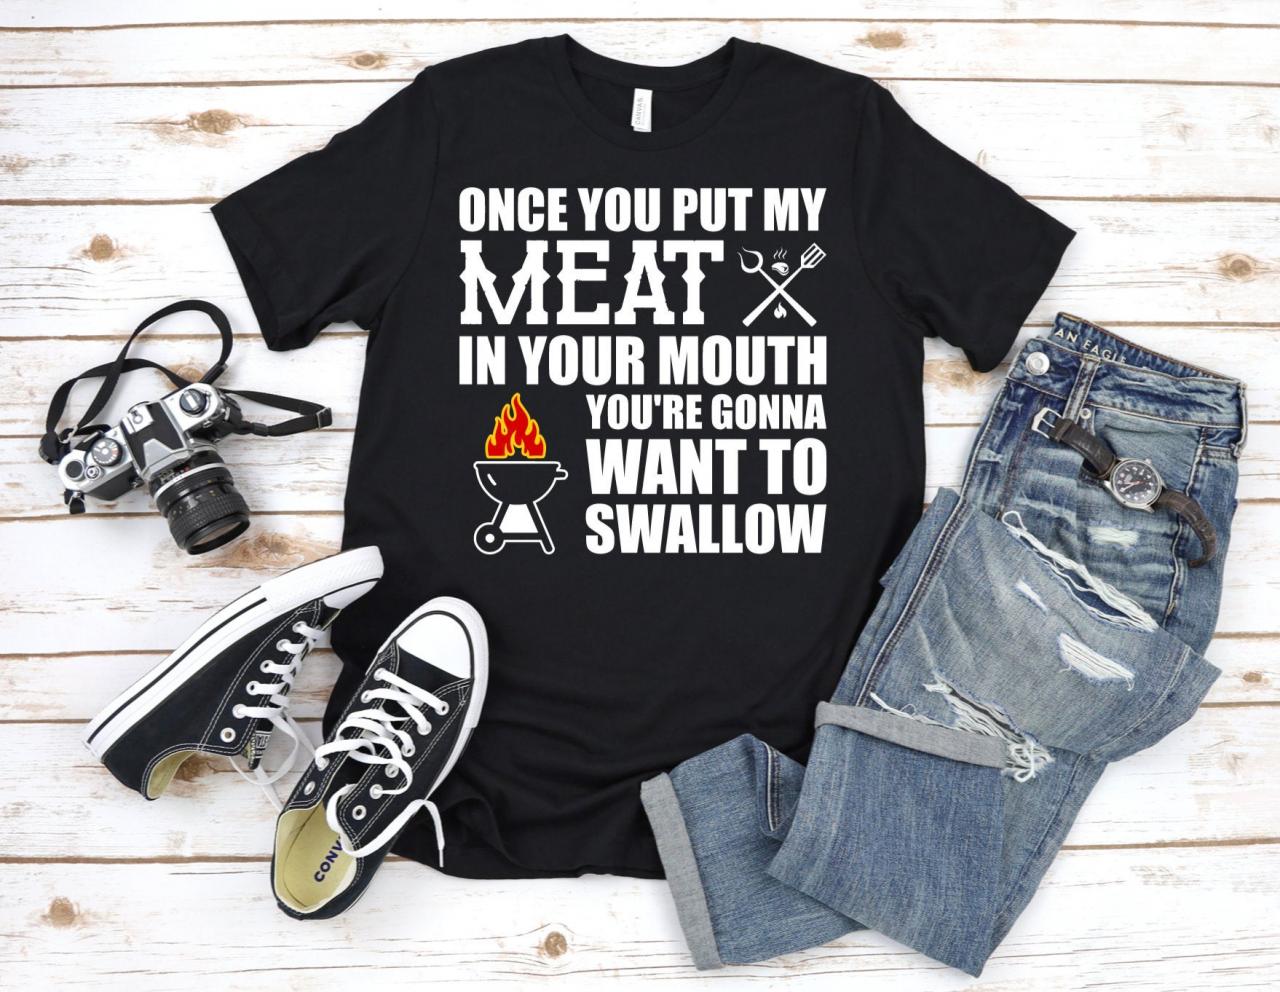 Once You Put My Meat In Your Mouth You're Gonna Want To Swallow Shirt, Funny Chef Shirt, Grill, Bbq Gift Shirt